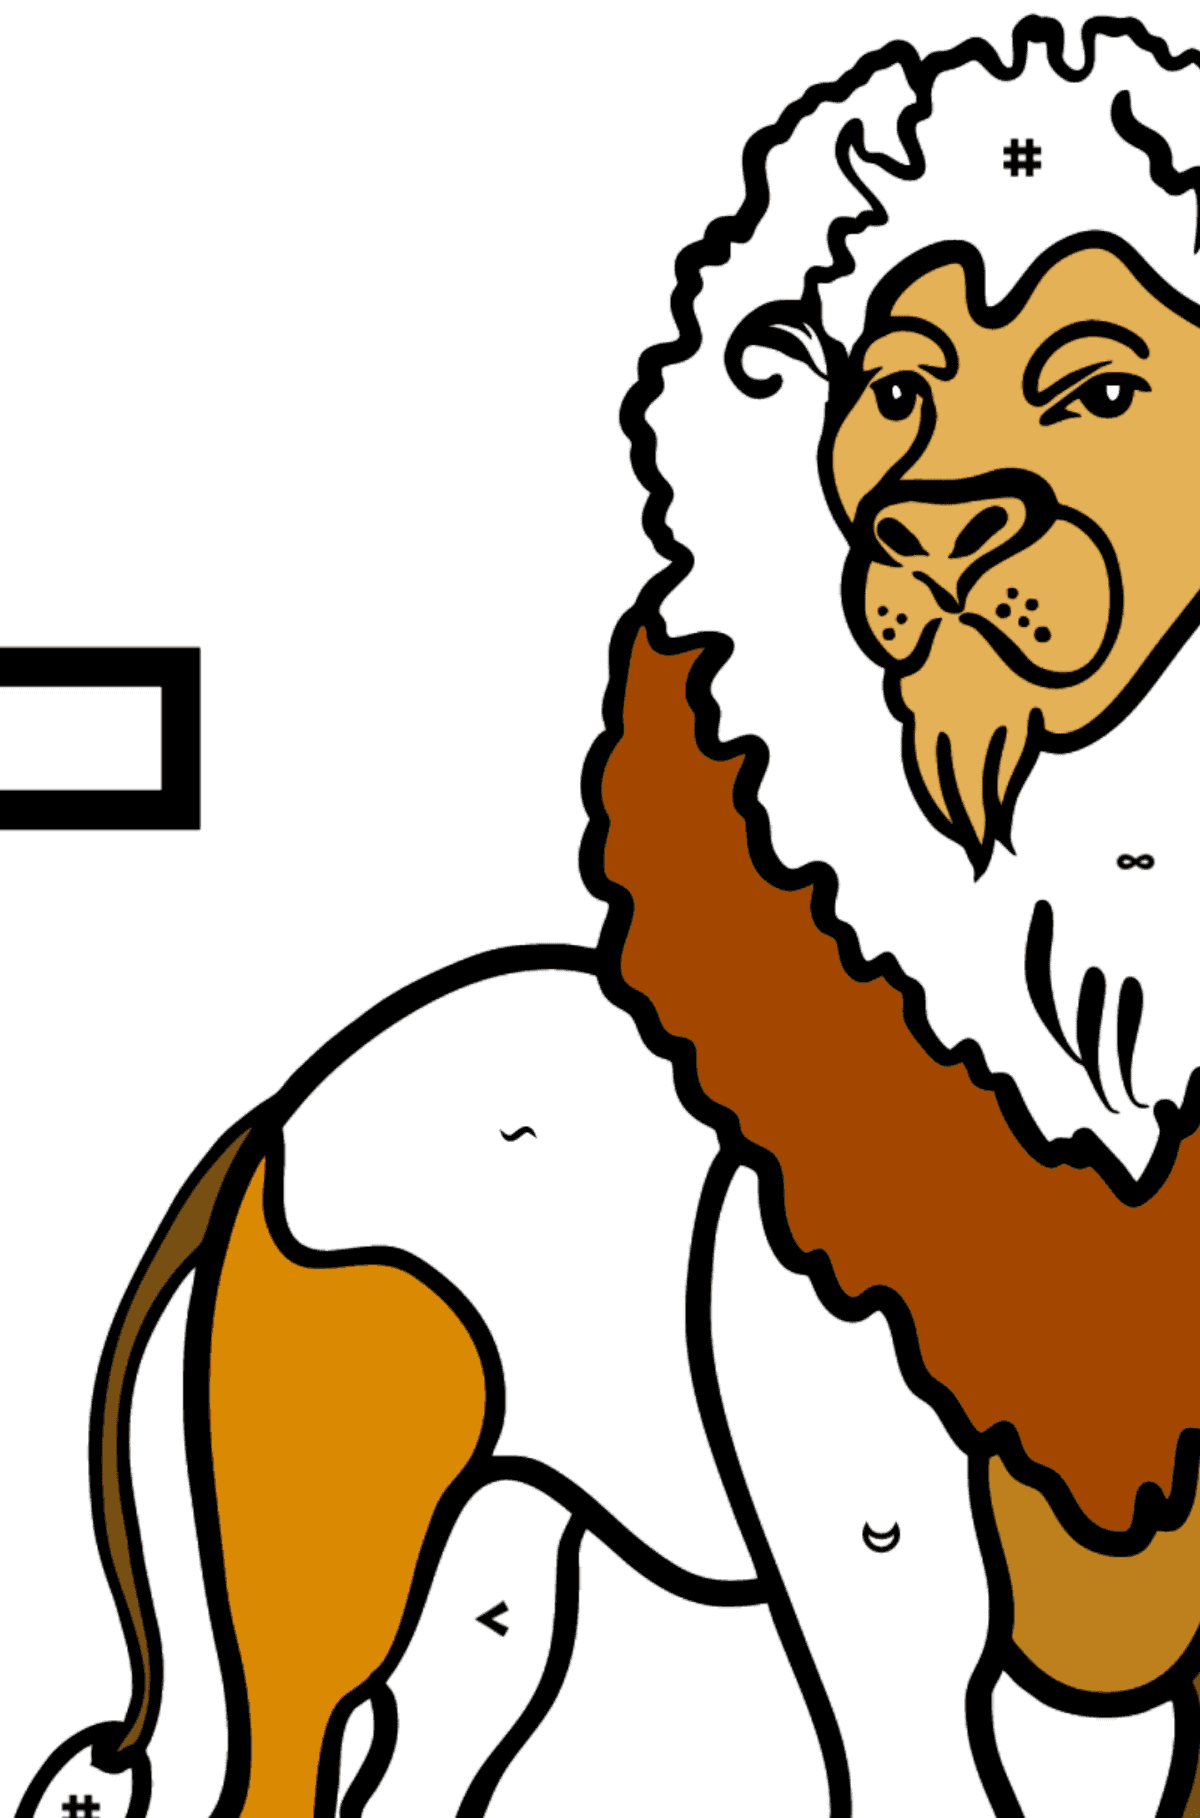 French Letter L coloring pages - LION - Coloring by Symbols for Kids